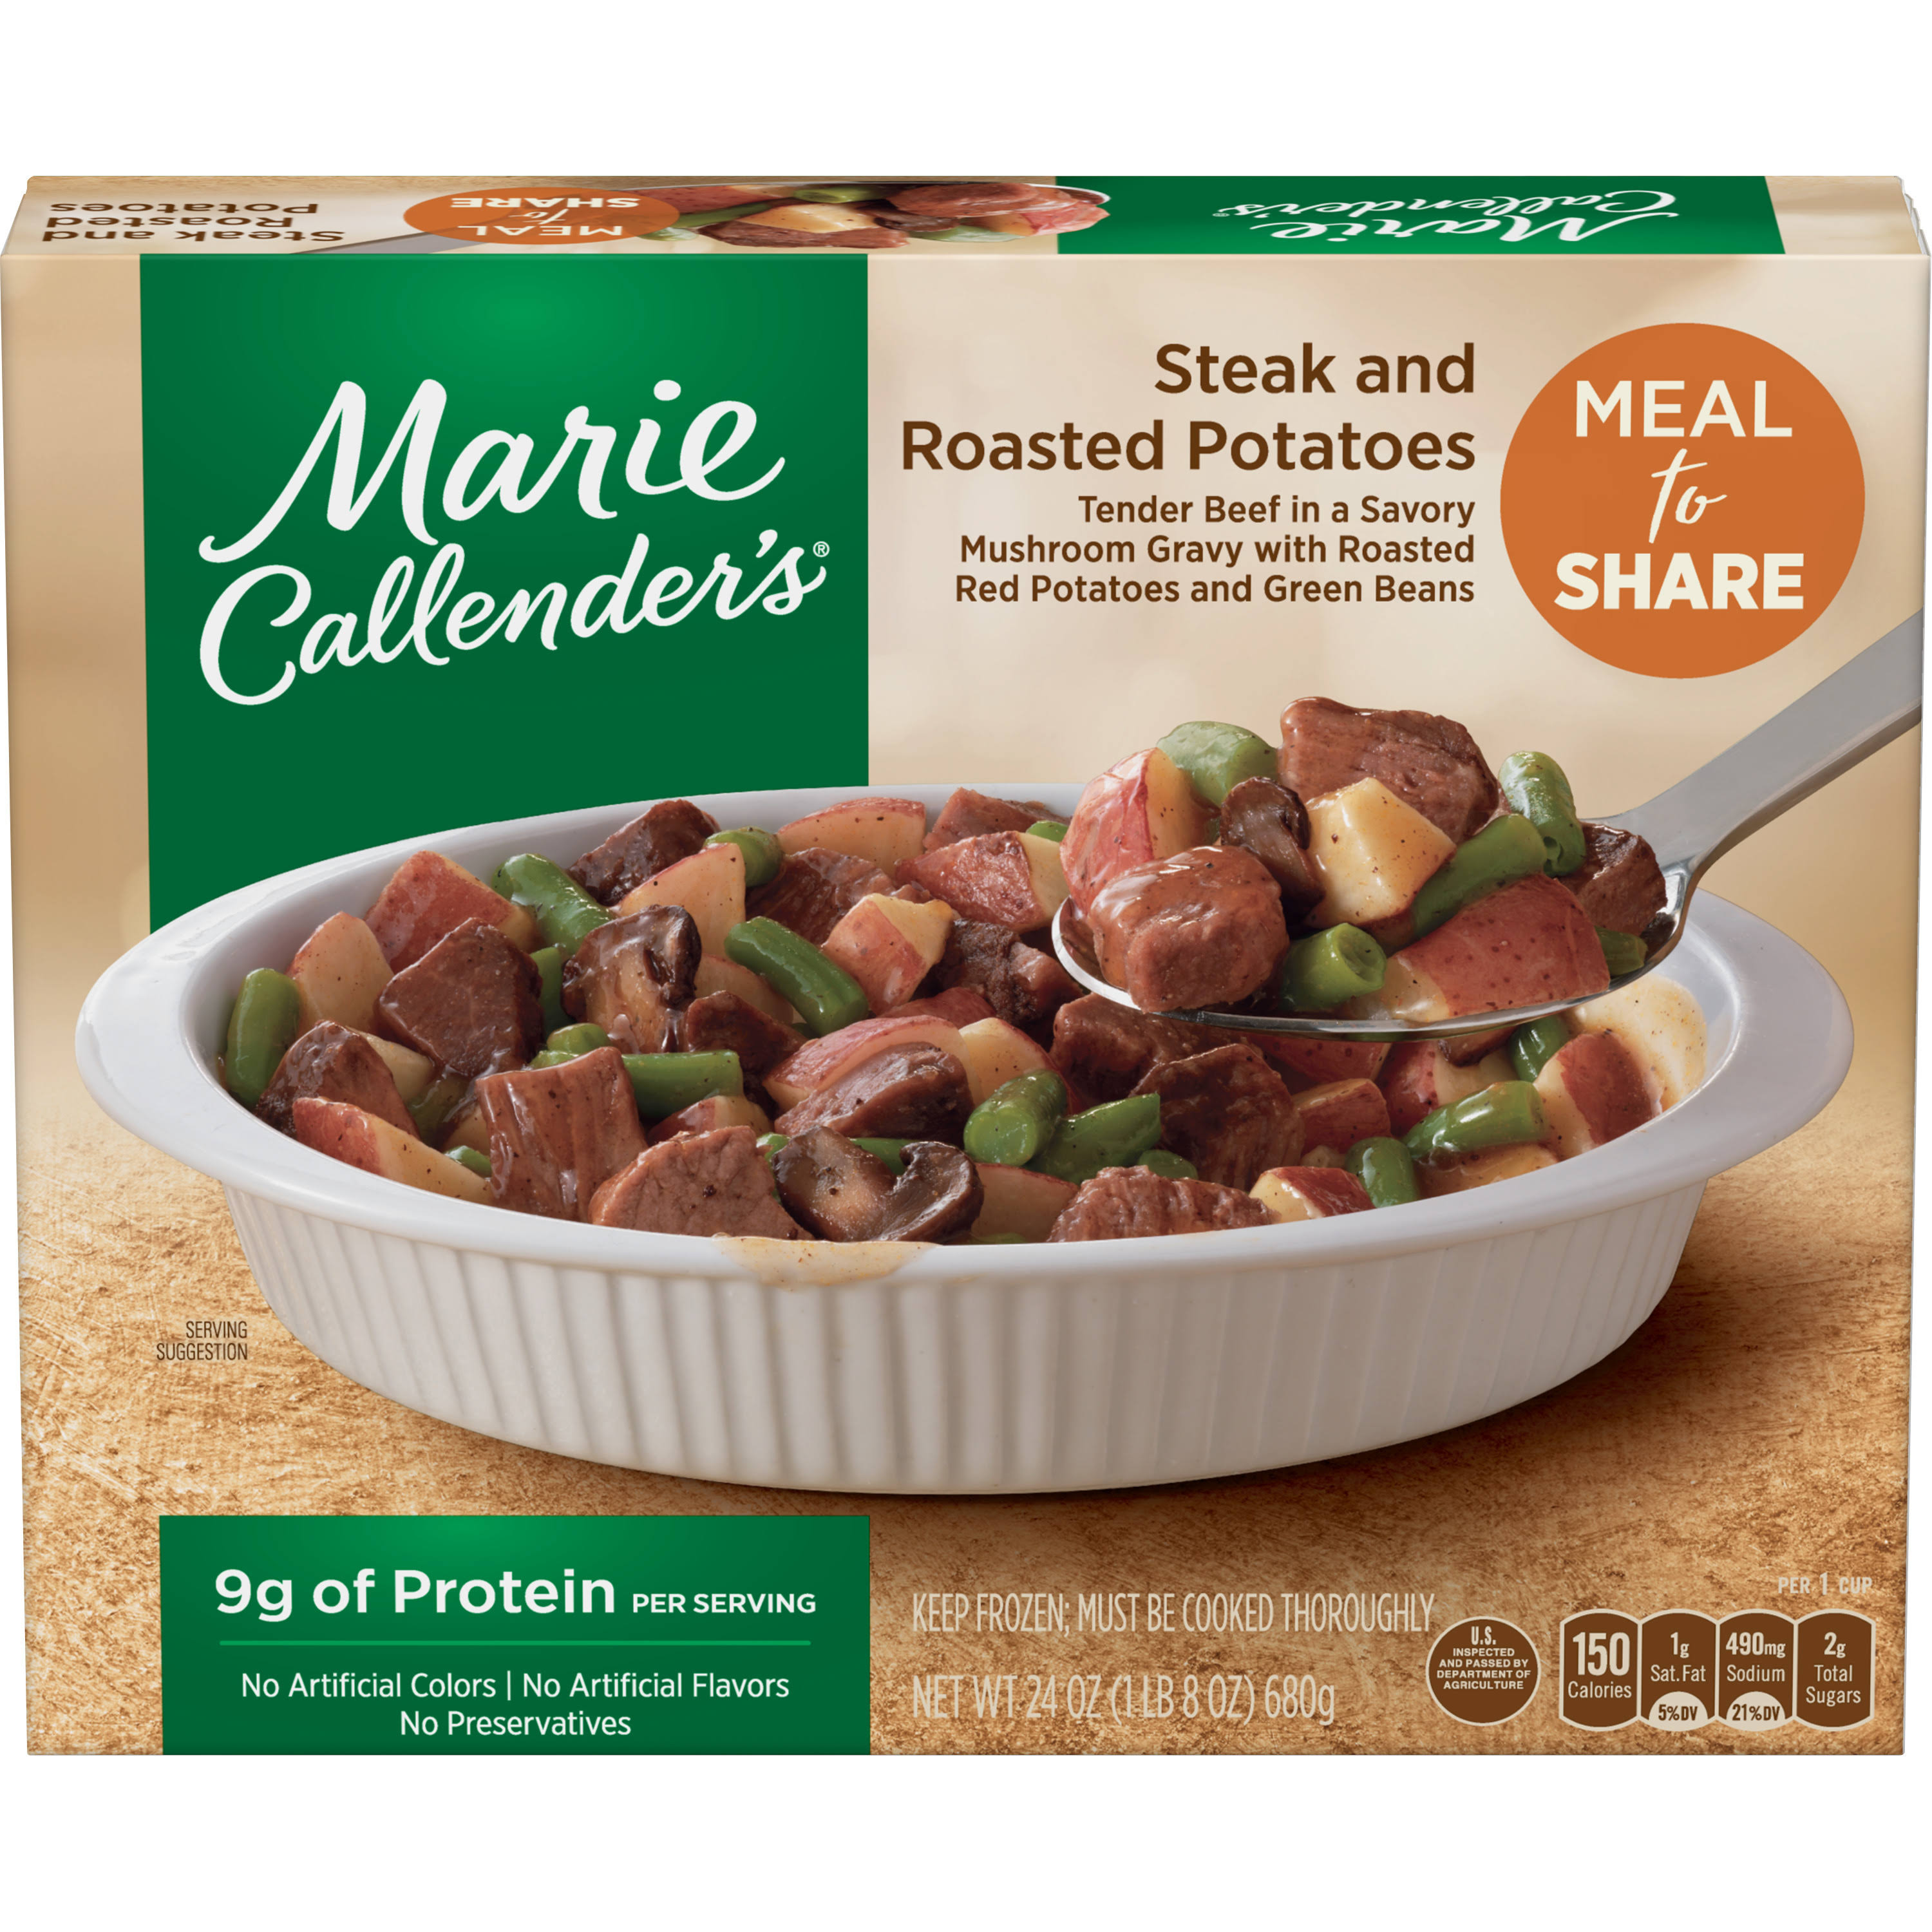 Marie Callender's Steak And Roasted Potatoes, Meal to Share - 24 oz